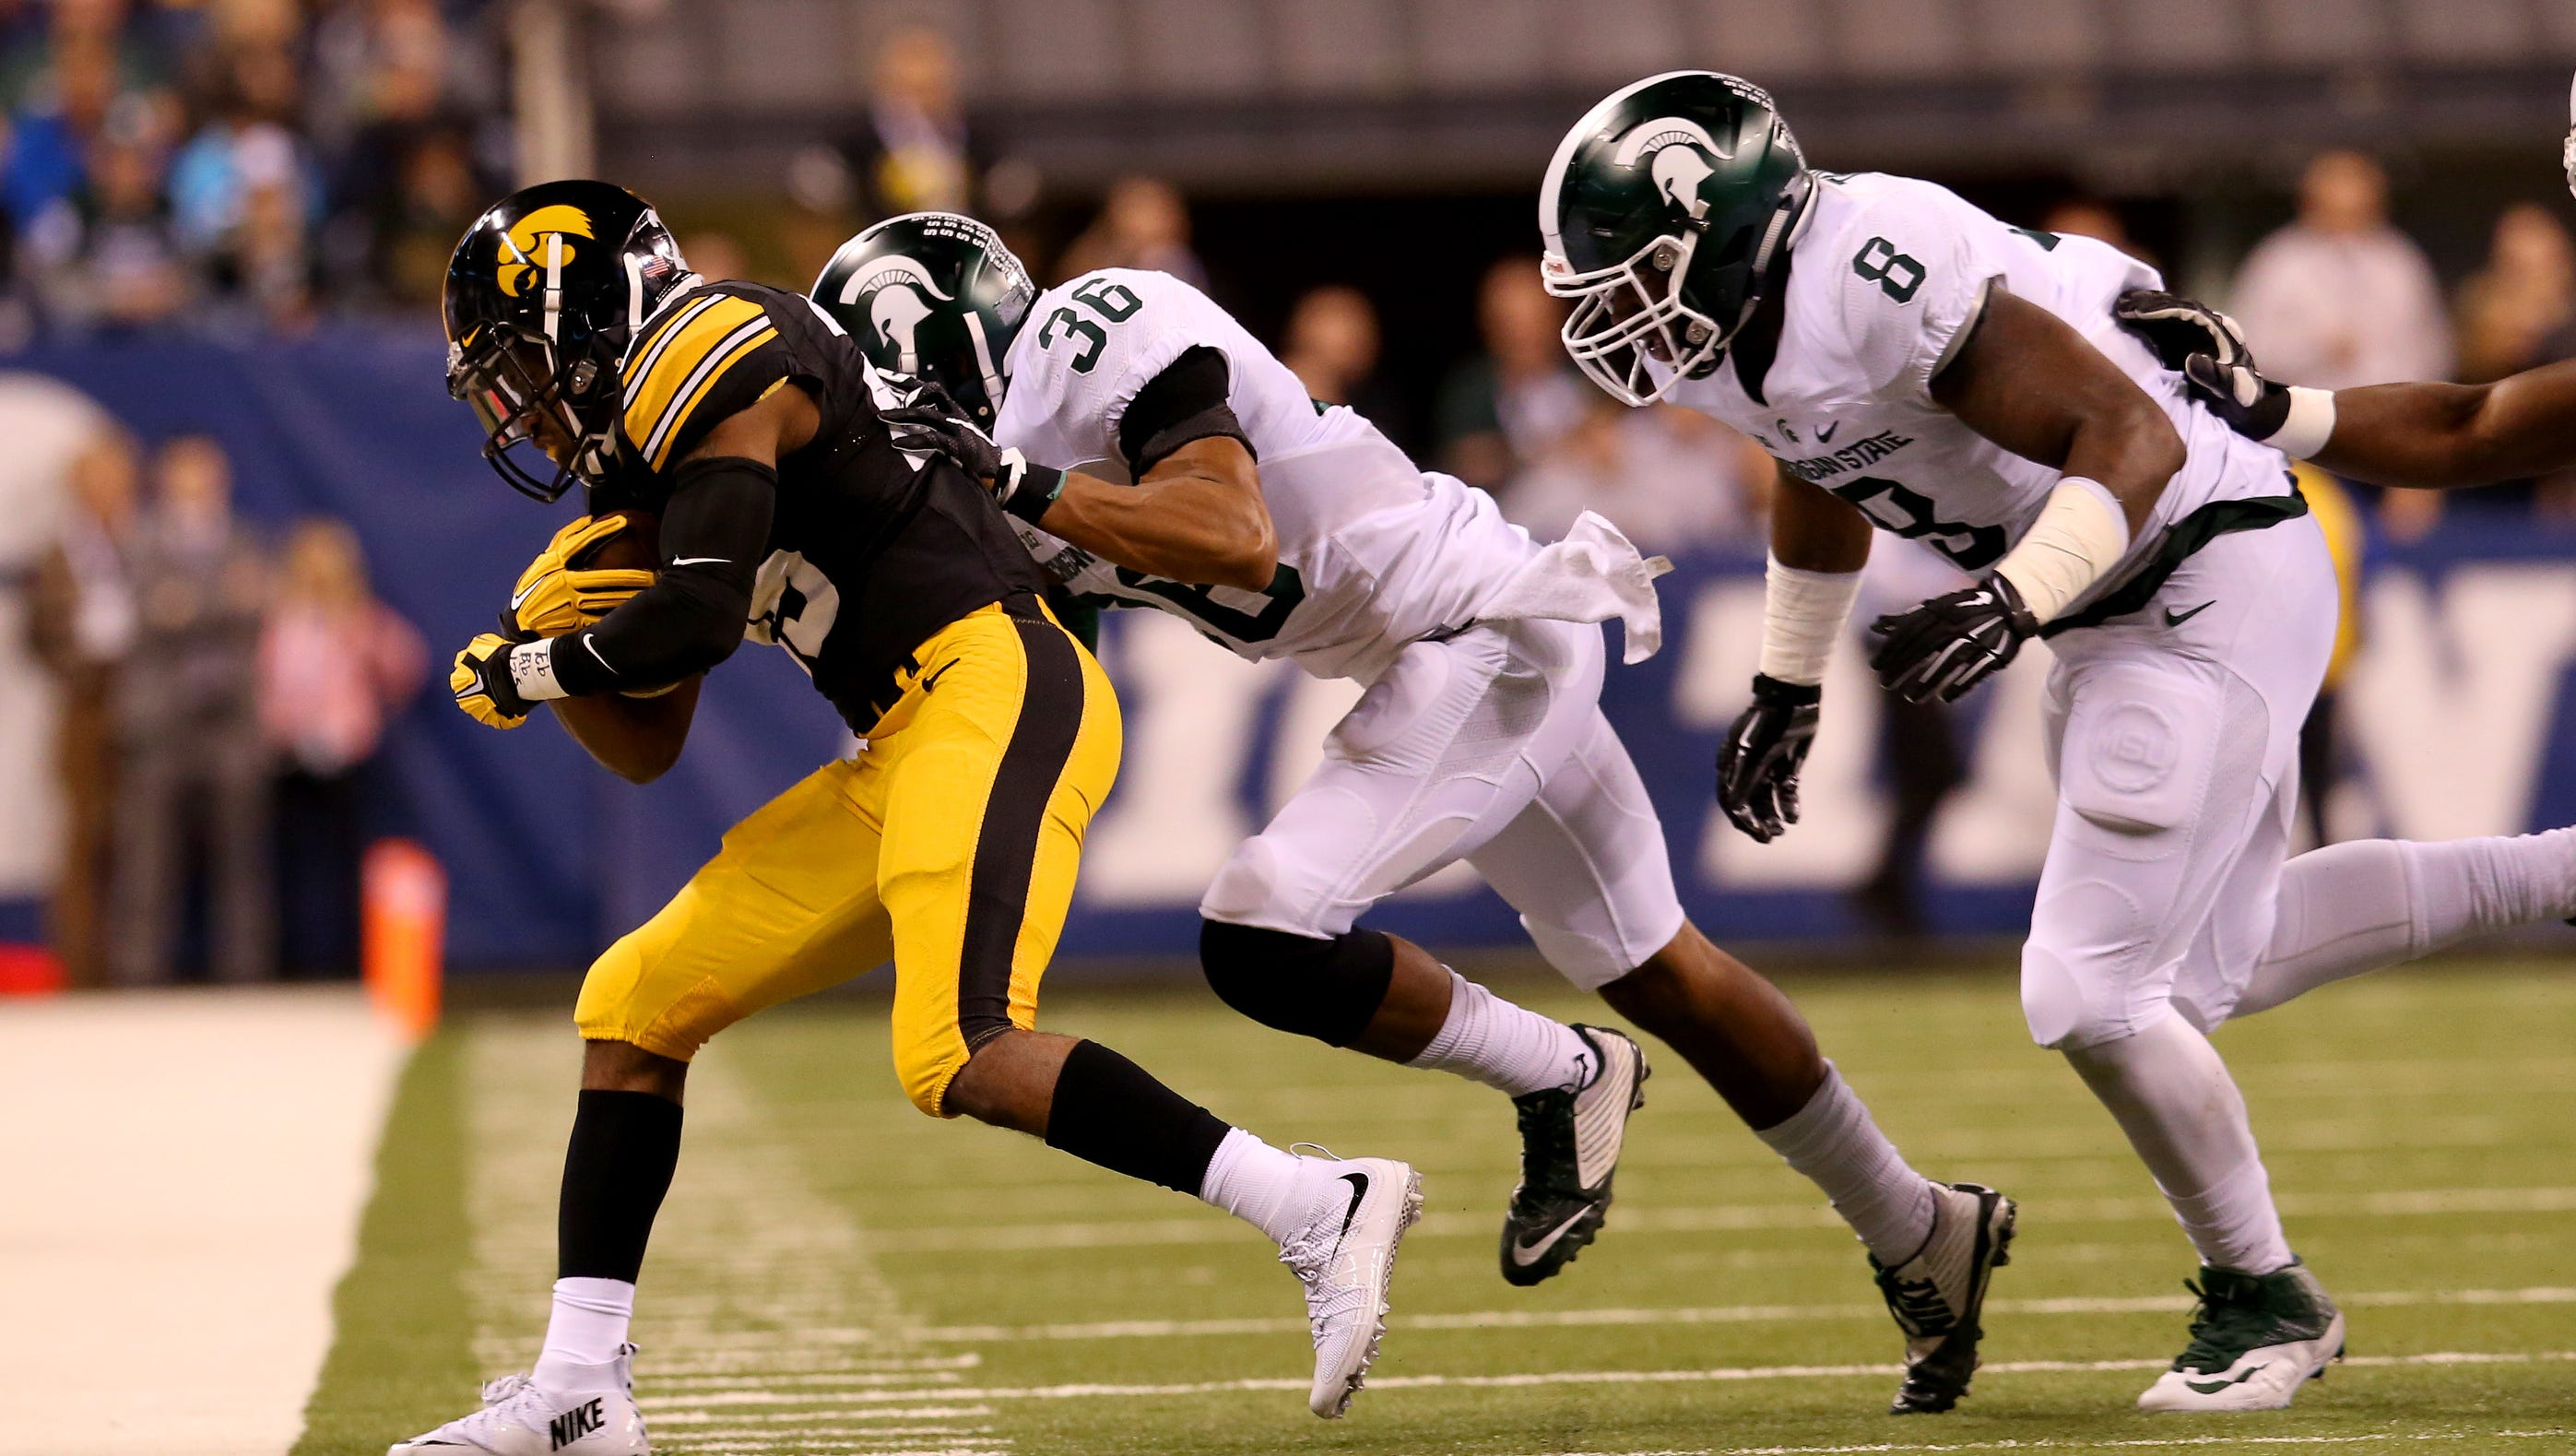 Iowa running back Akrum Wadley (25) is drove out of bounds by Michigan State cornerback Arjen Colquhoun (36) during the Big Ten Championship Game at Lucas Oil Stadium on Dec. 5, 2015.